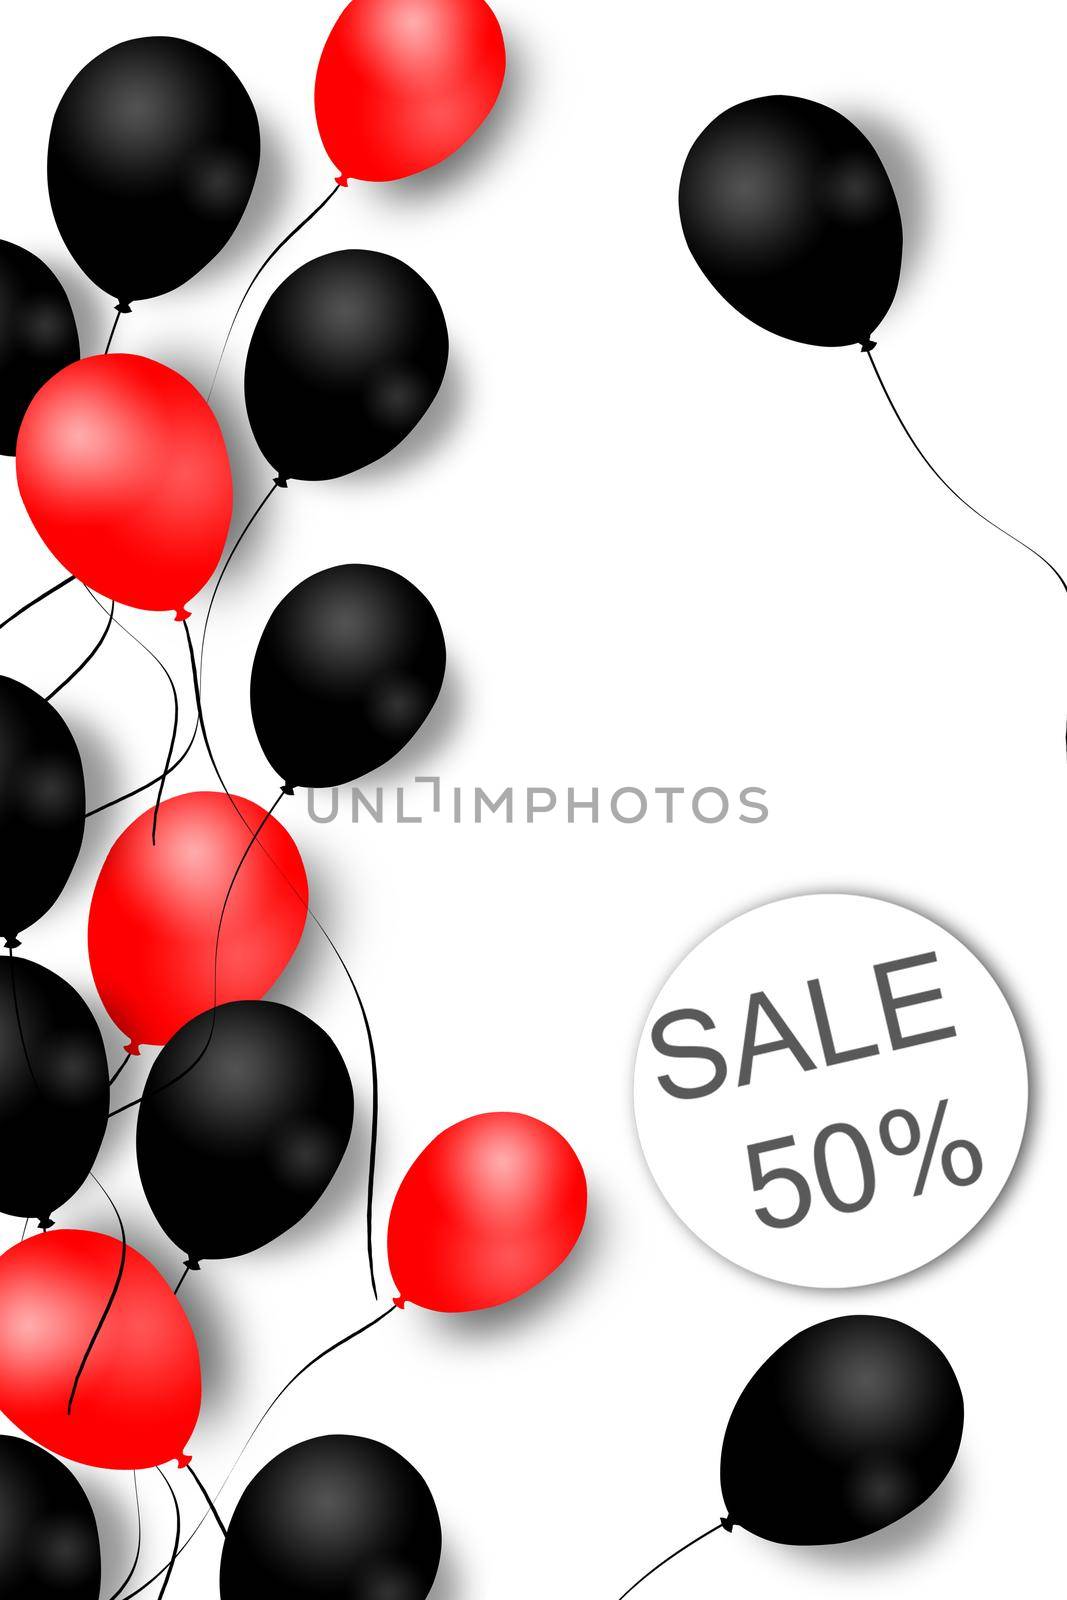 Black friday sale background with balloons. Modern design. Universal background for poster, banners, flyers, card. Illustration. Pattern